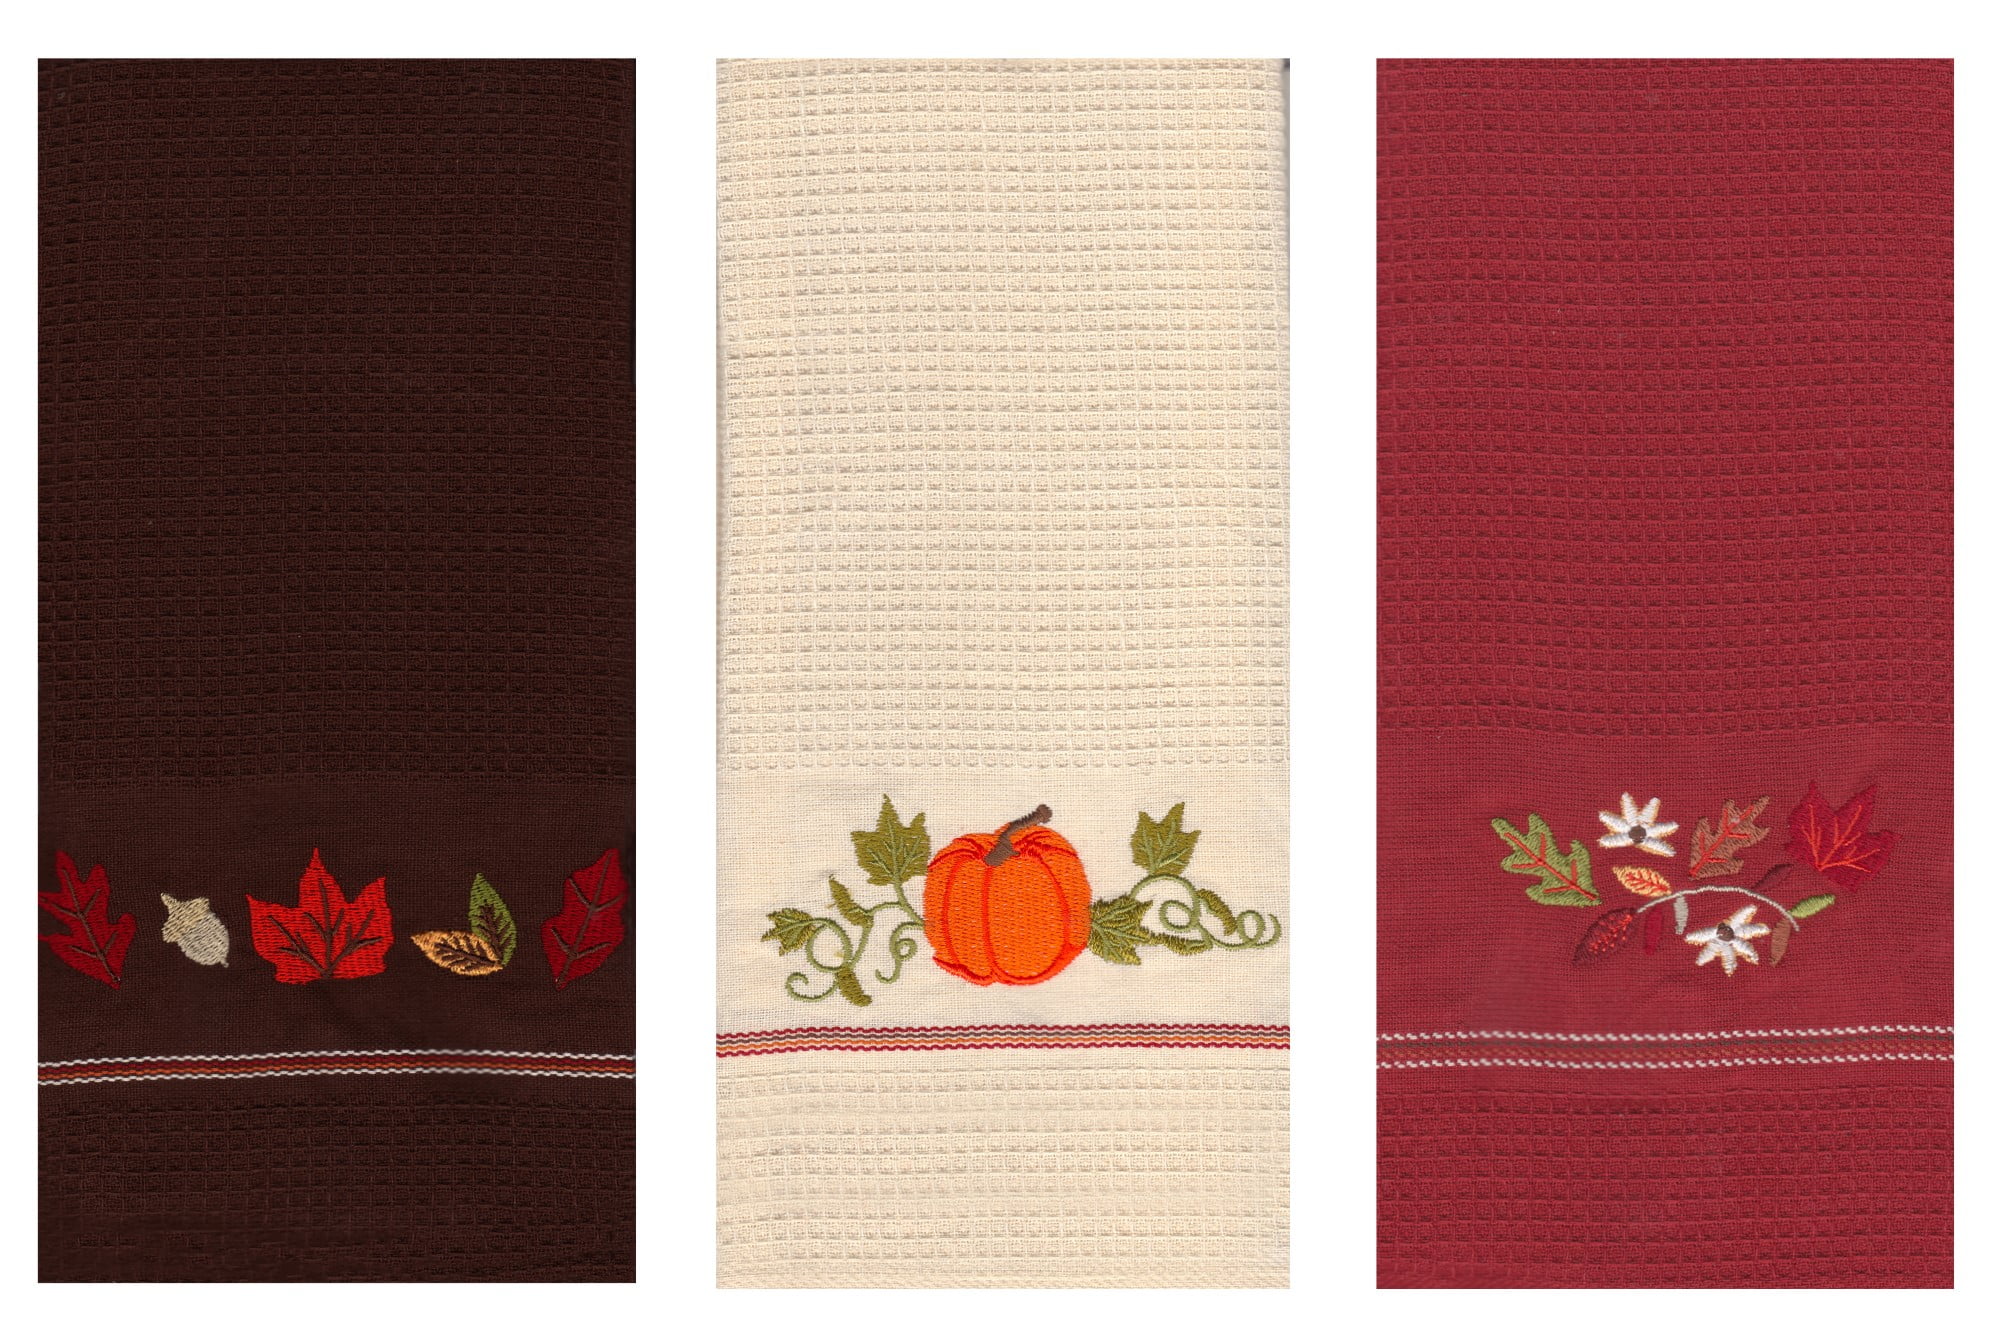 Kane Home Burgundy Kitchen Towel 2-Pack Set, Fall Leaves, Cotton, Size: 16 x 26, Red